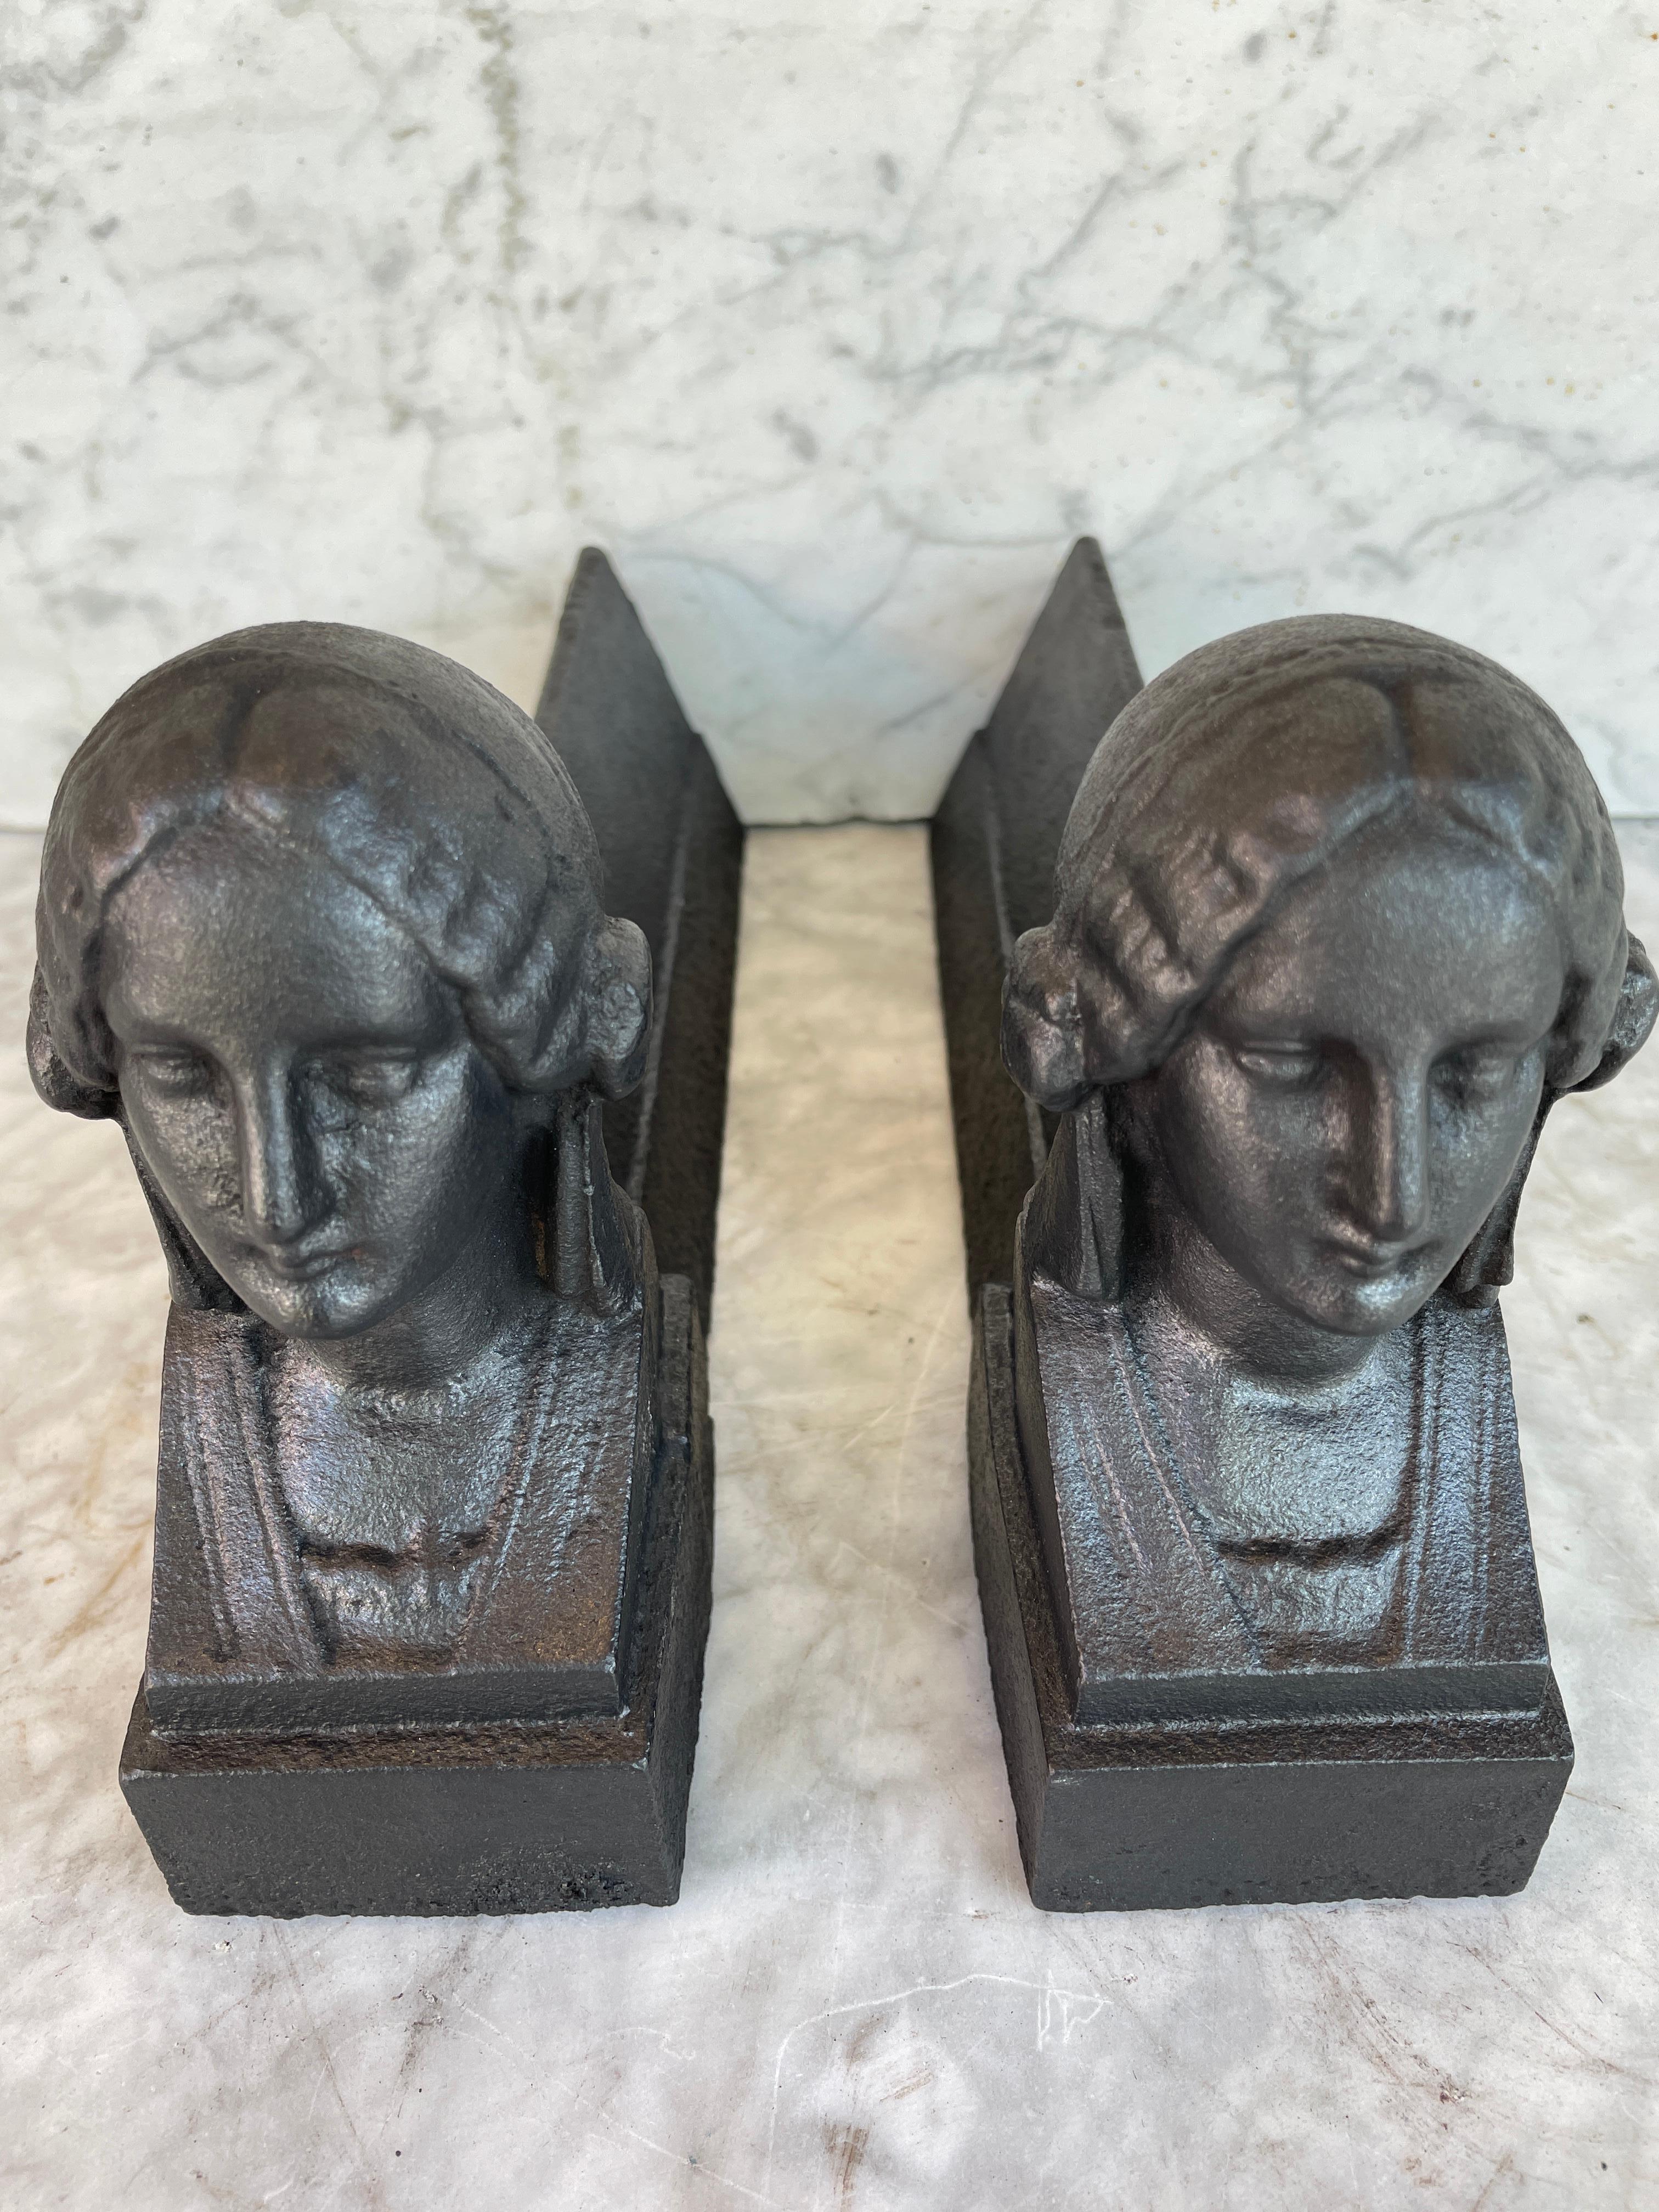 French Napoleon III 'Woman' andirons or firedogs, 19th century
The are in good condition.